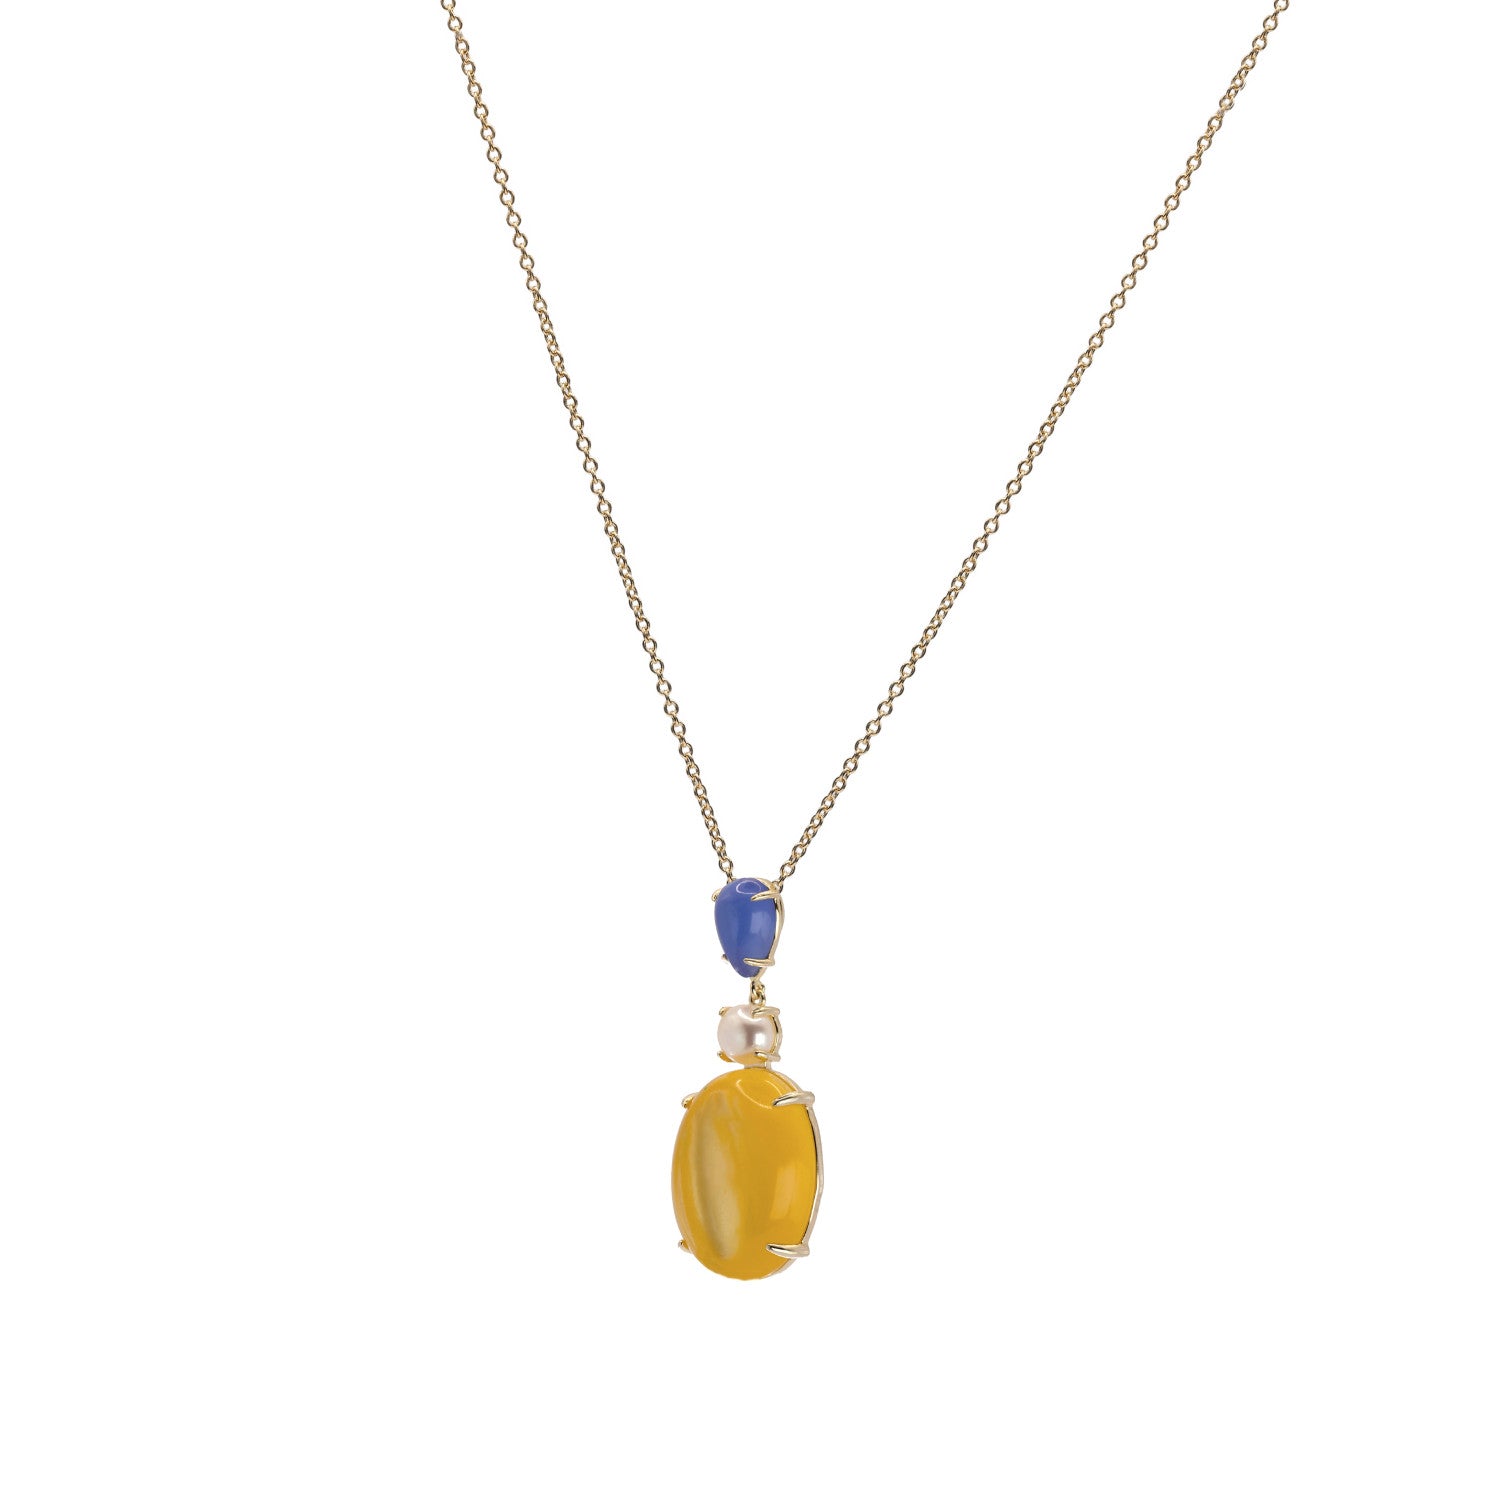 Necklaces with natural stones in citrine tones